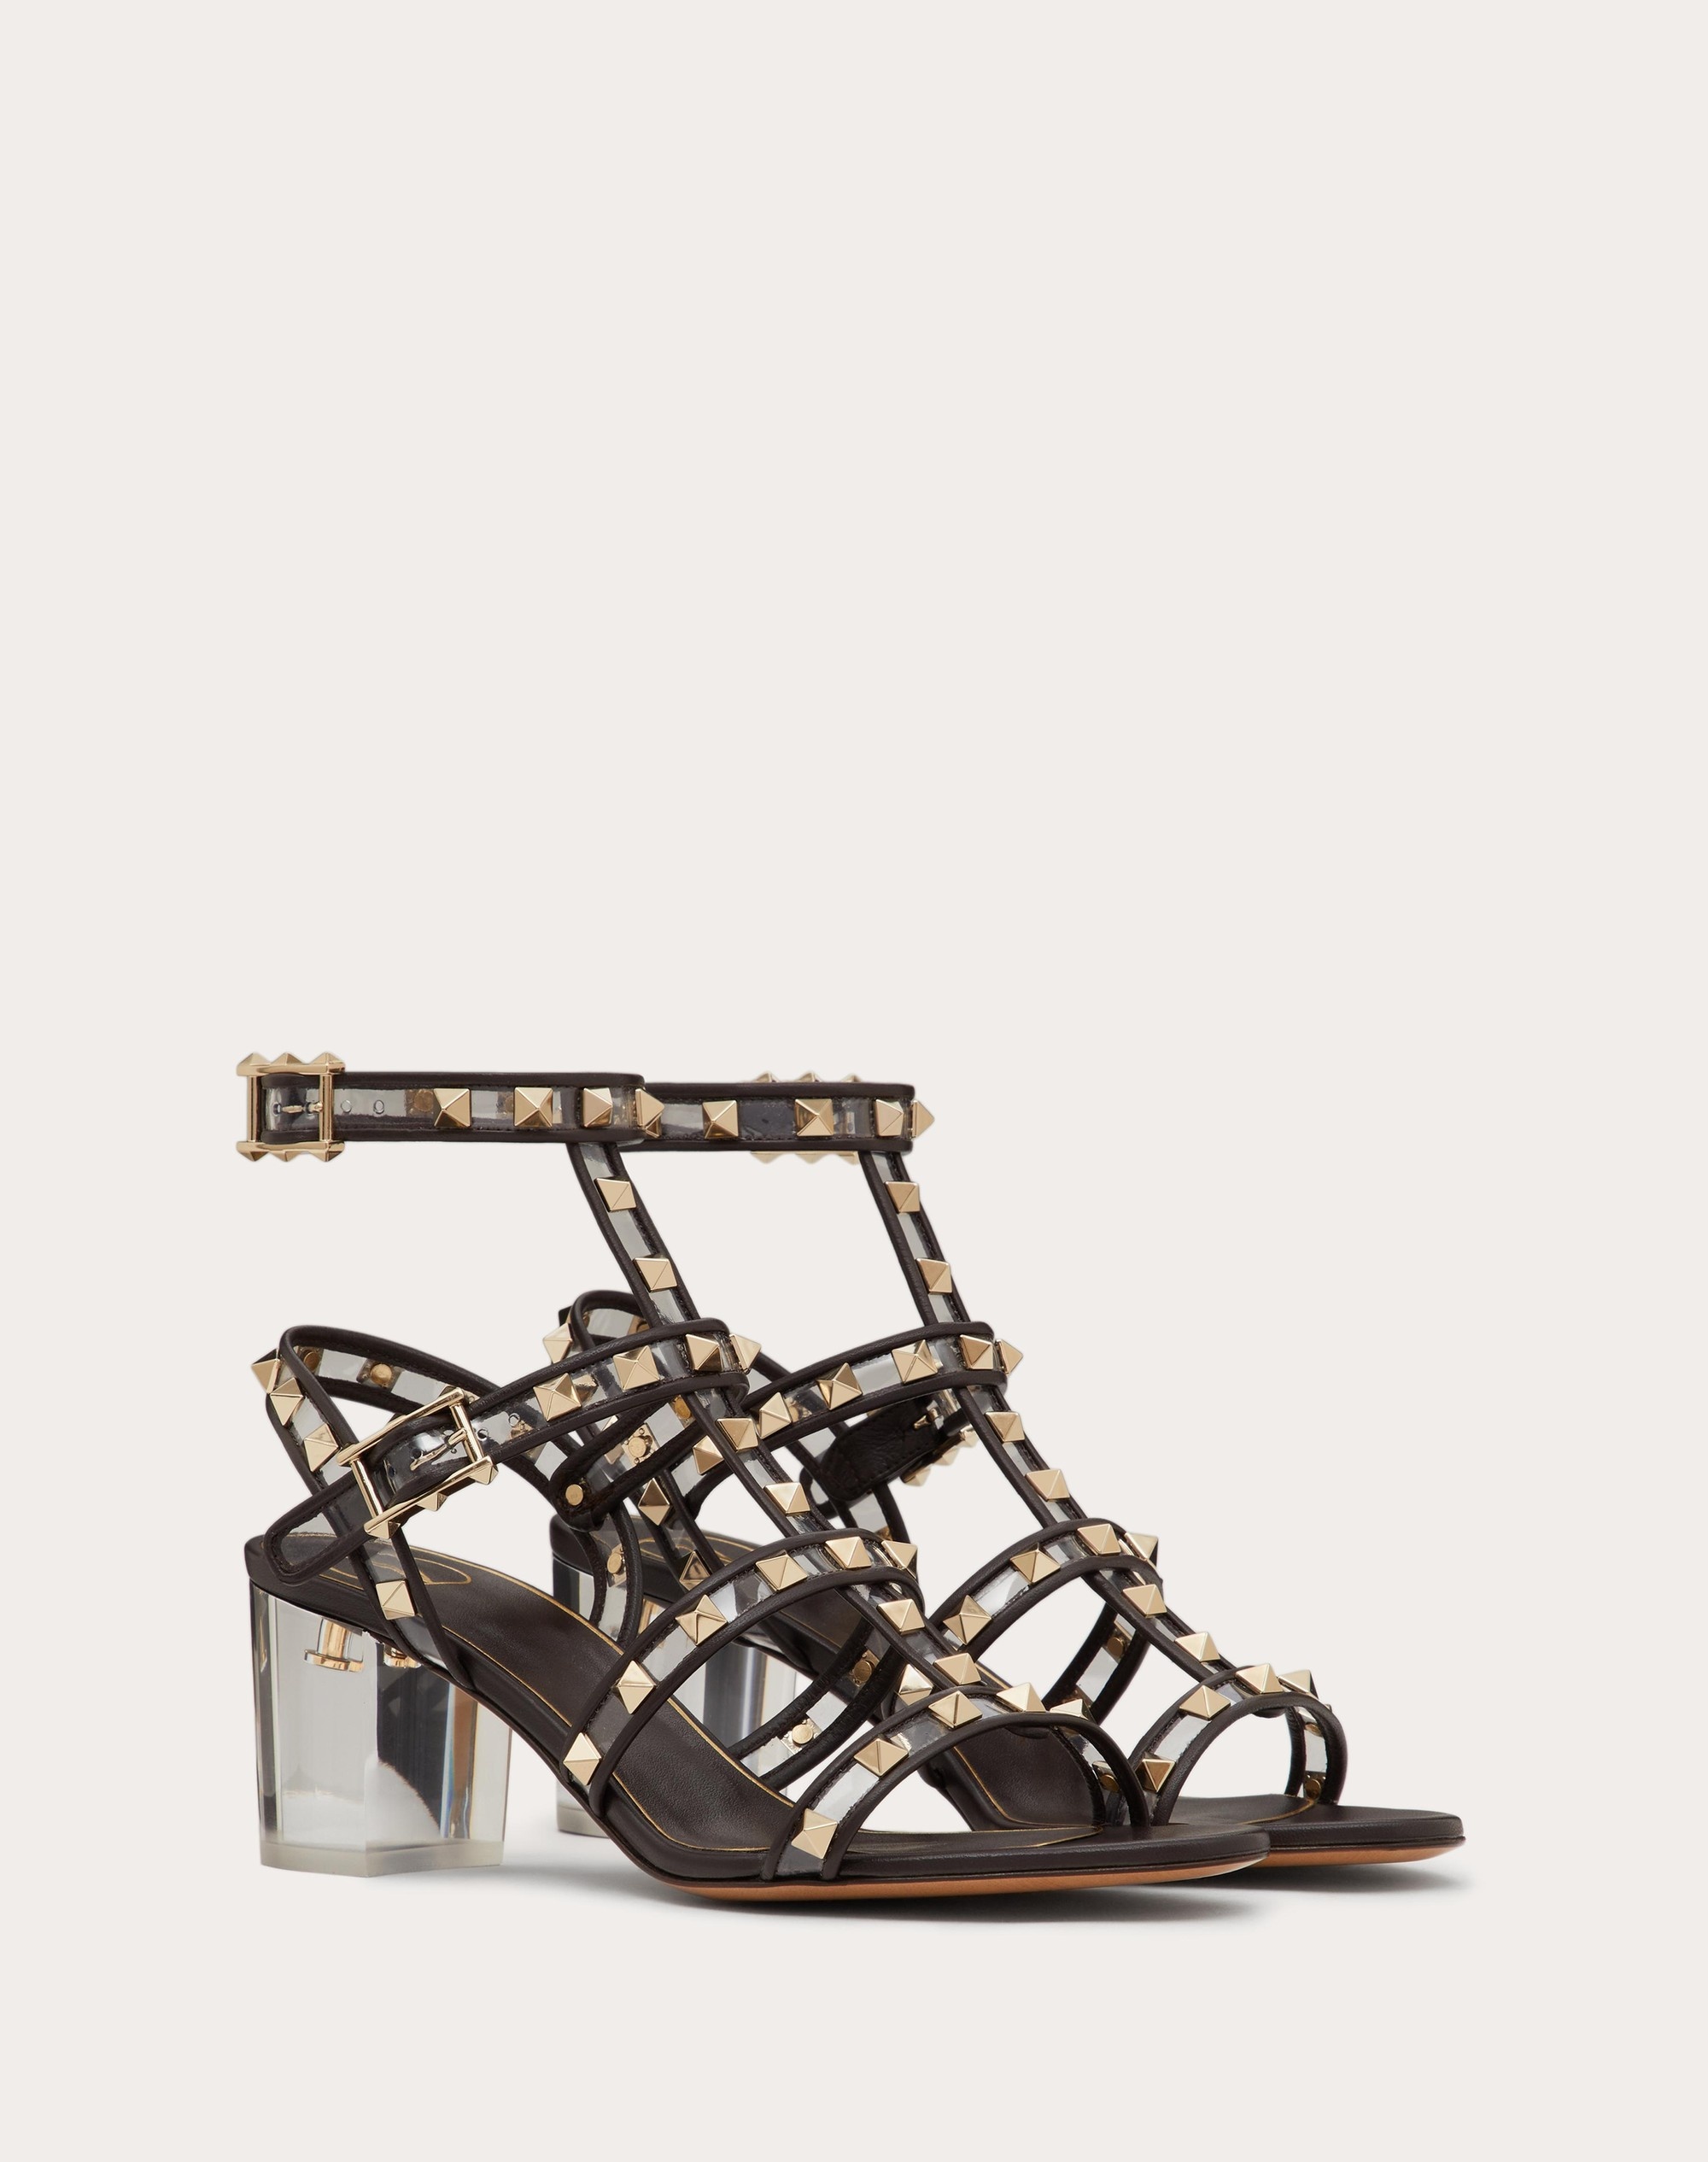 ROCKSTUD SANDAL IN POLYMER MATERIAL WITH STRAPS AND PLEXI HEEL 60MM - 2